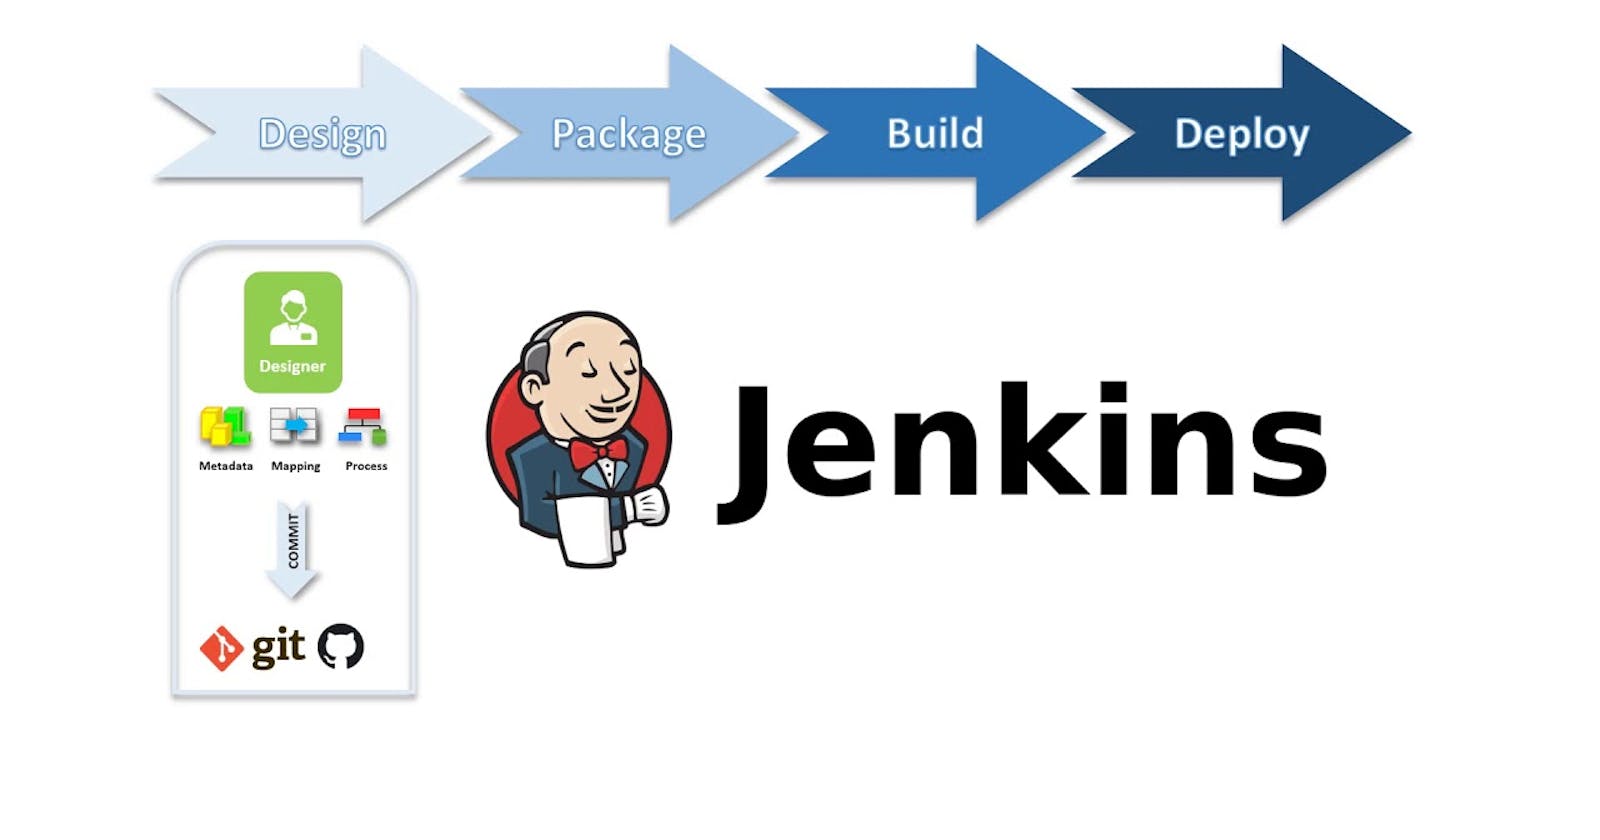 Implementing CI/CD pipeline for parallel build jobs on Jenkins agents